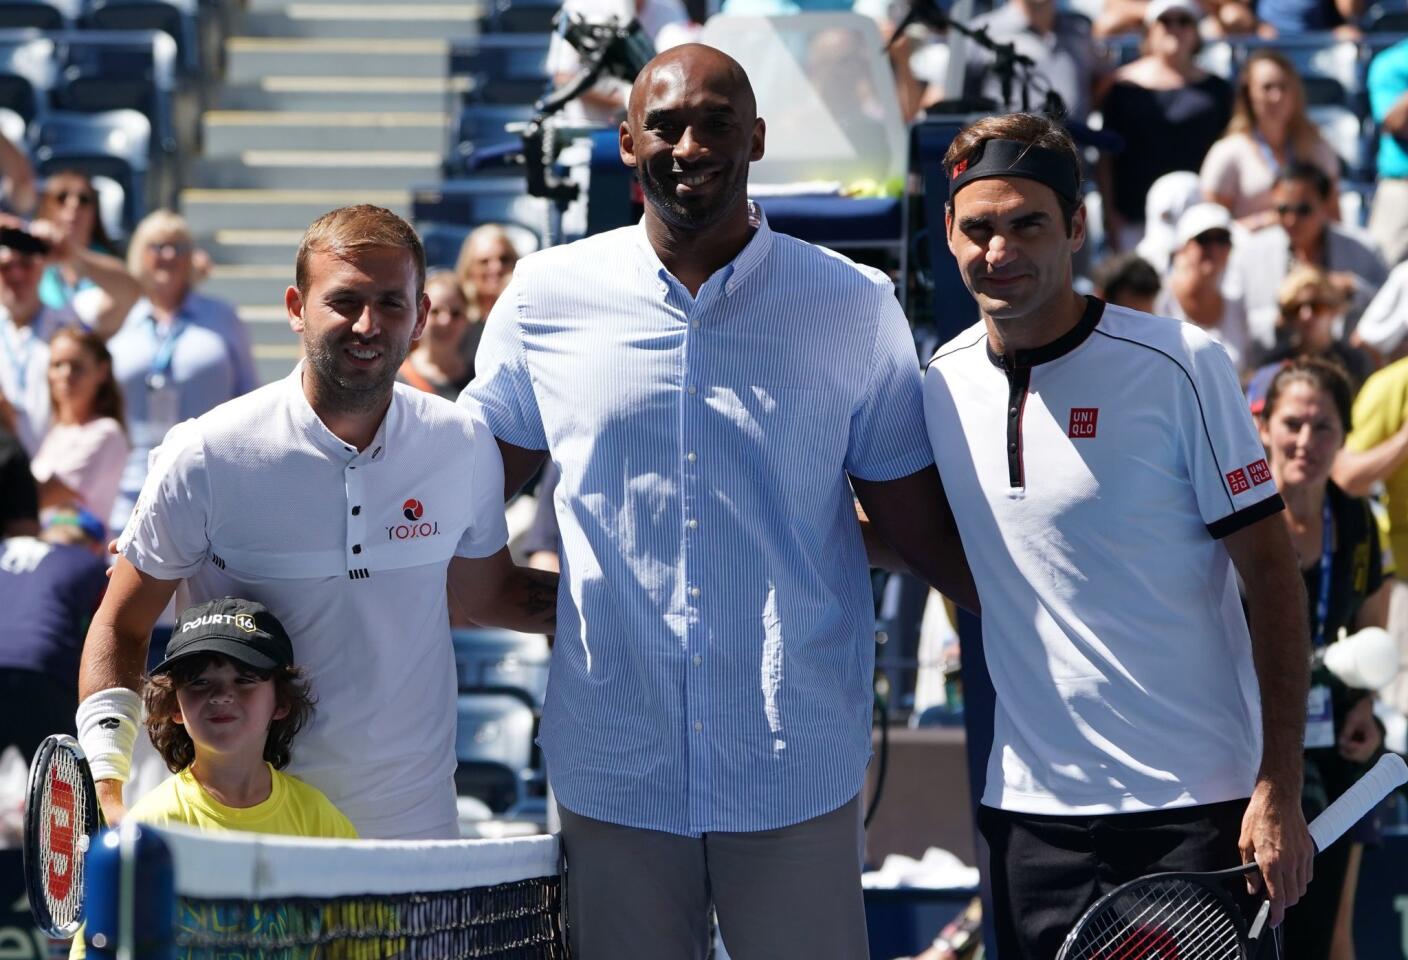 Former NBA star Kobe Bryant (C), Roger Federer (R) of Switzerland and Daniel Evans of Great Britain pose before their Round Three Men's Singles match at the 2019 U.S. Open at the USTA Billie Jean King National Tennis Center in New York on Aug. 30, 2019.